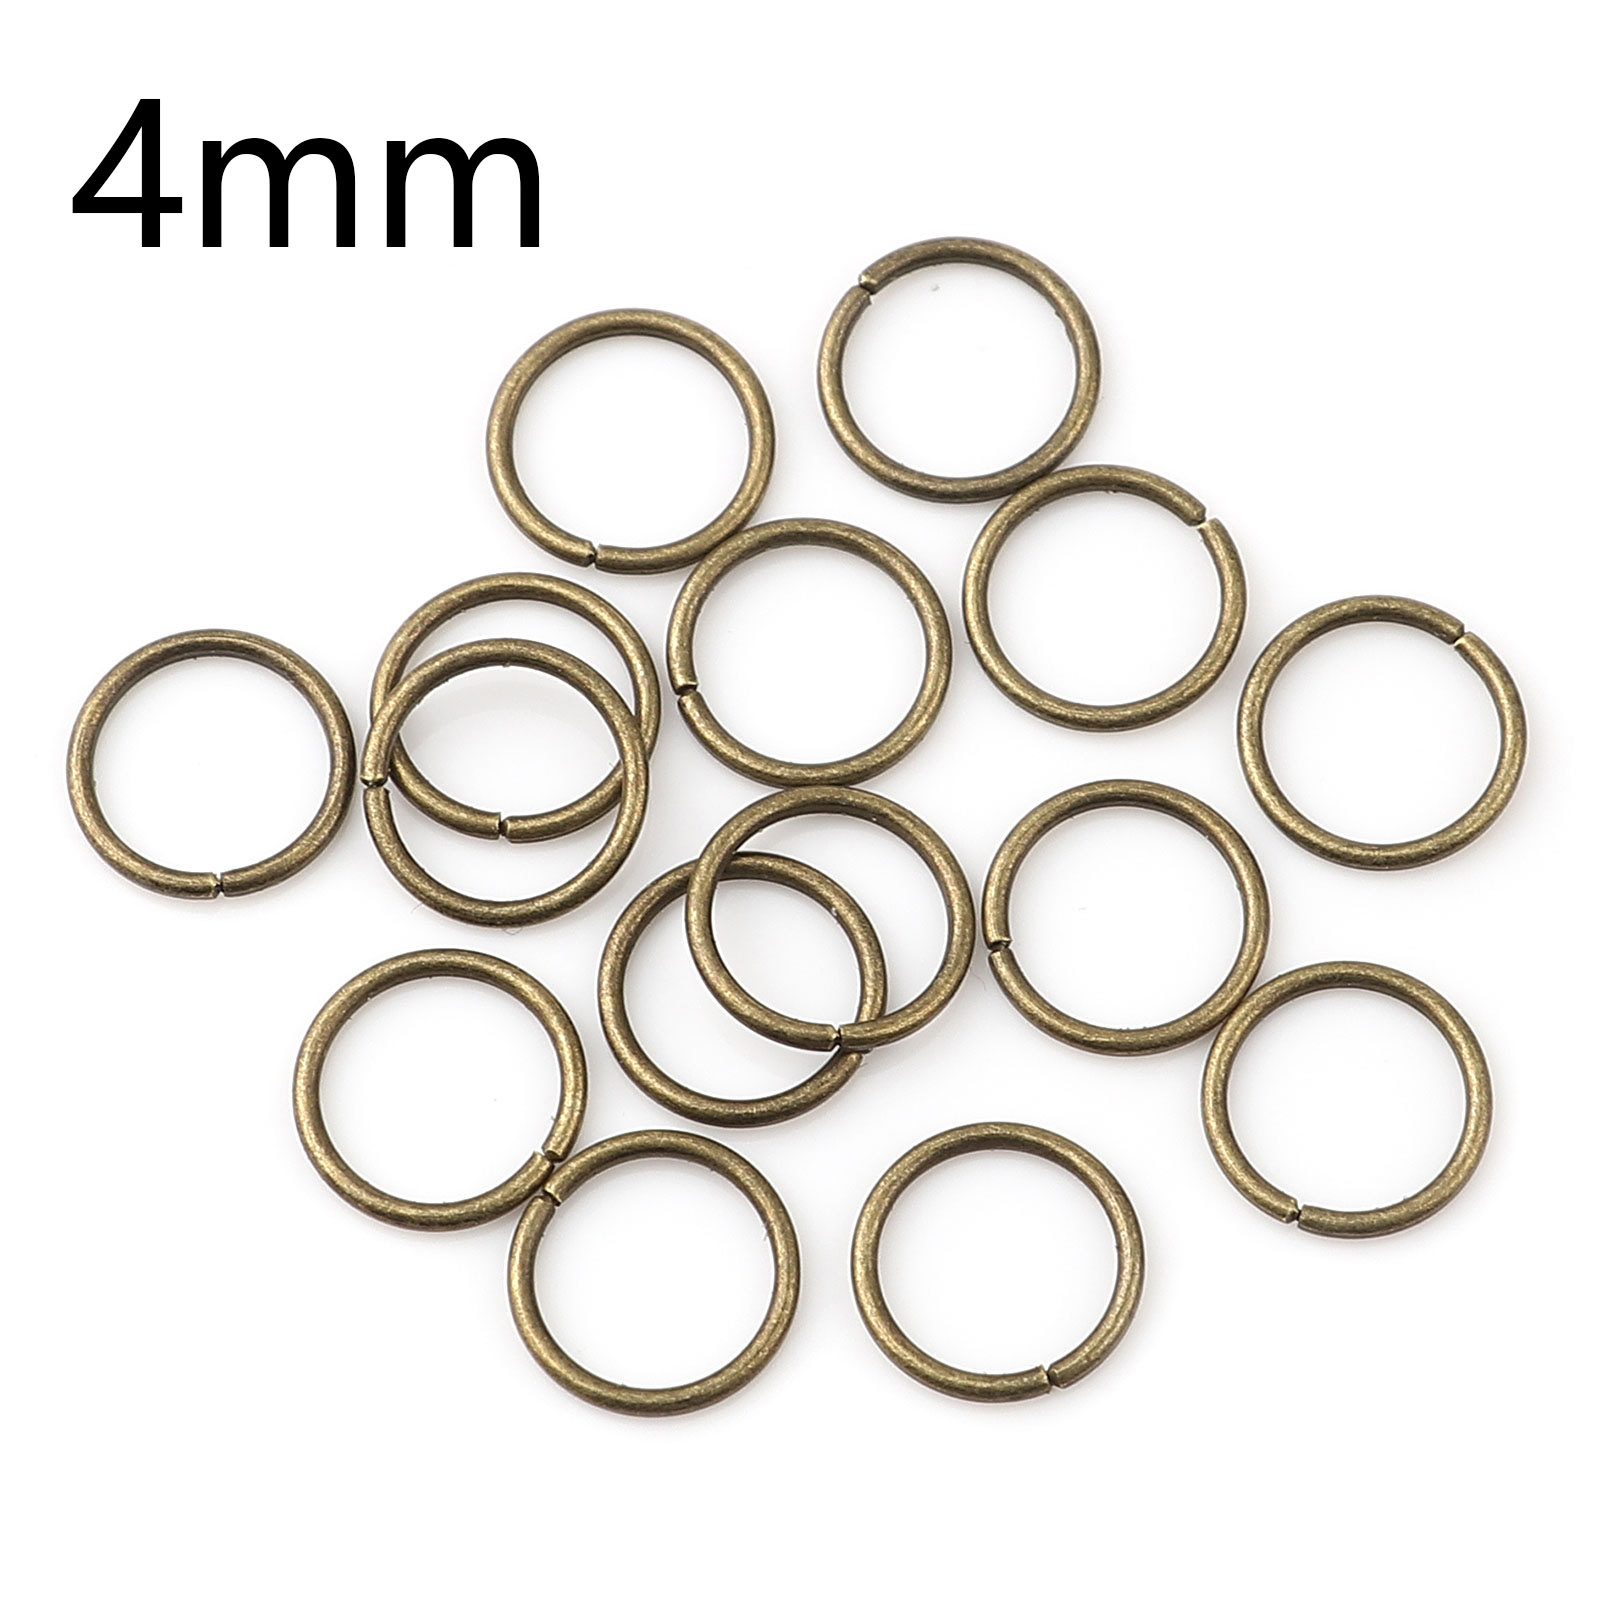 Picture of 0.7mm Iron Based Alloy Open Jump Rings Findings Circle Ring Antique Bronze 4mm Dia, 200 PCs